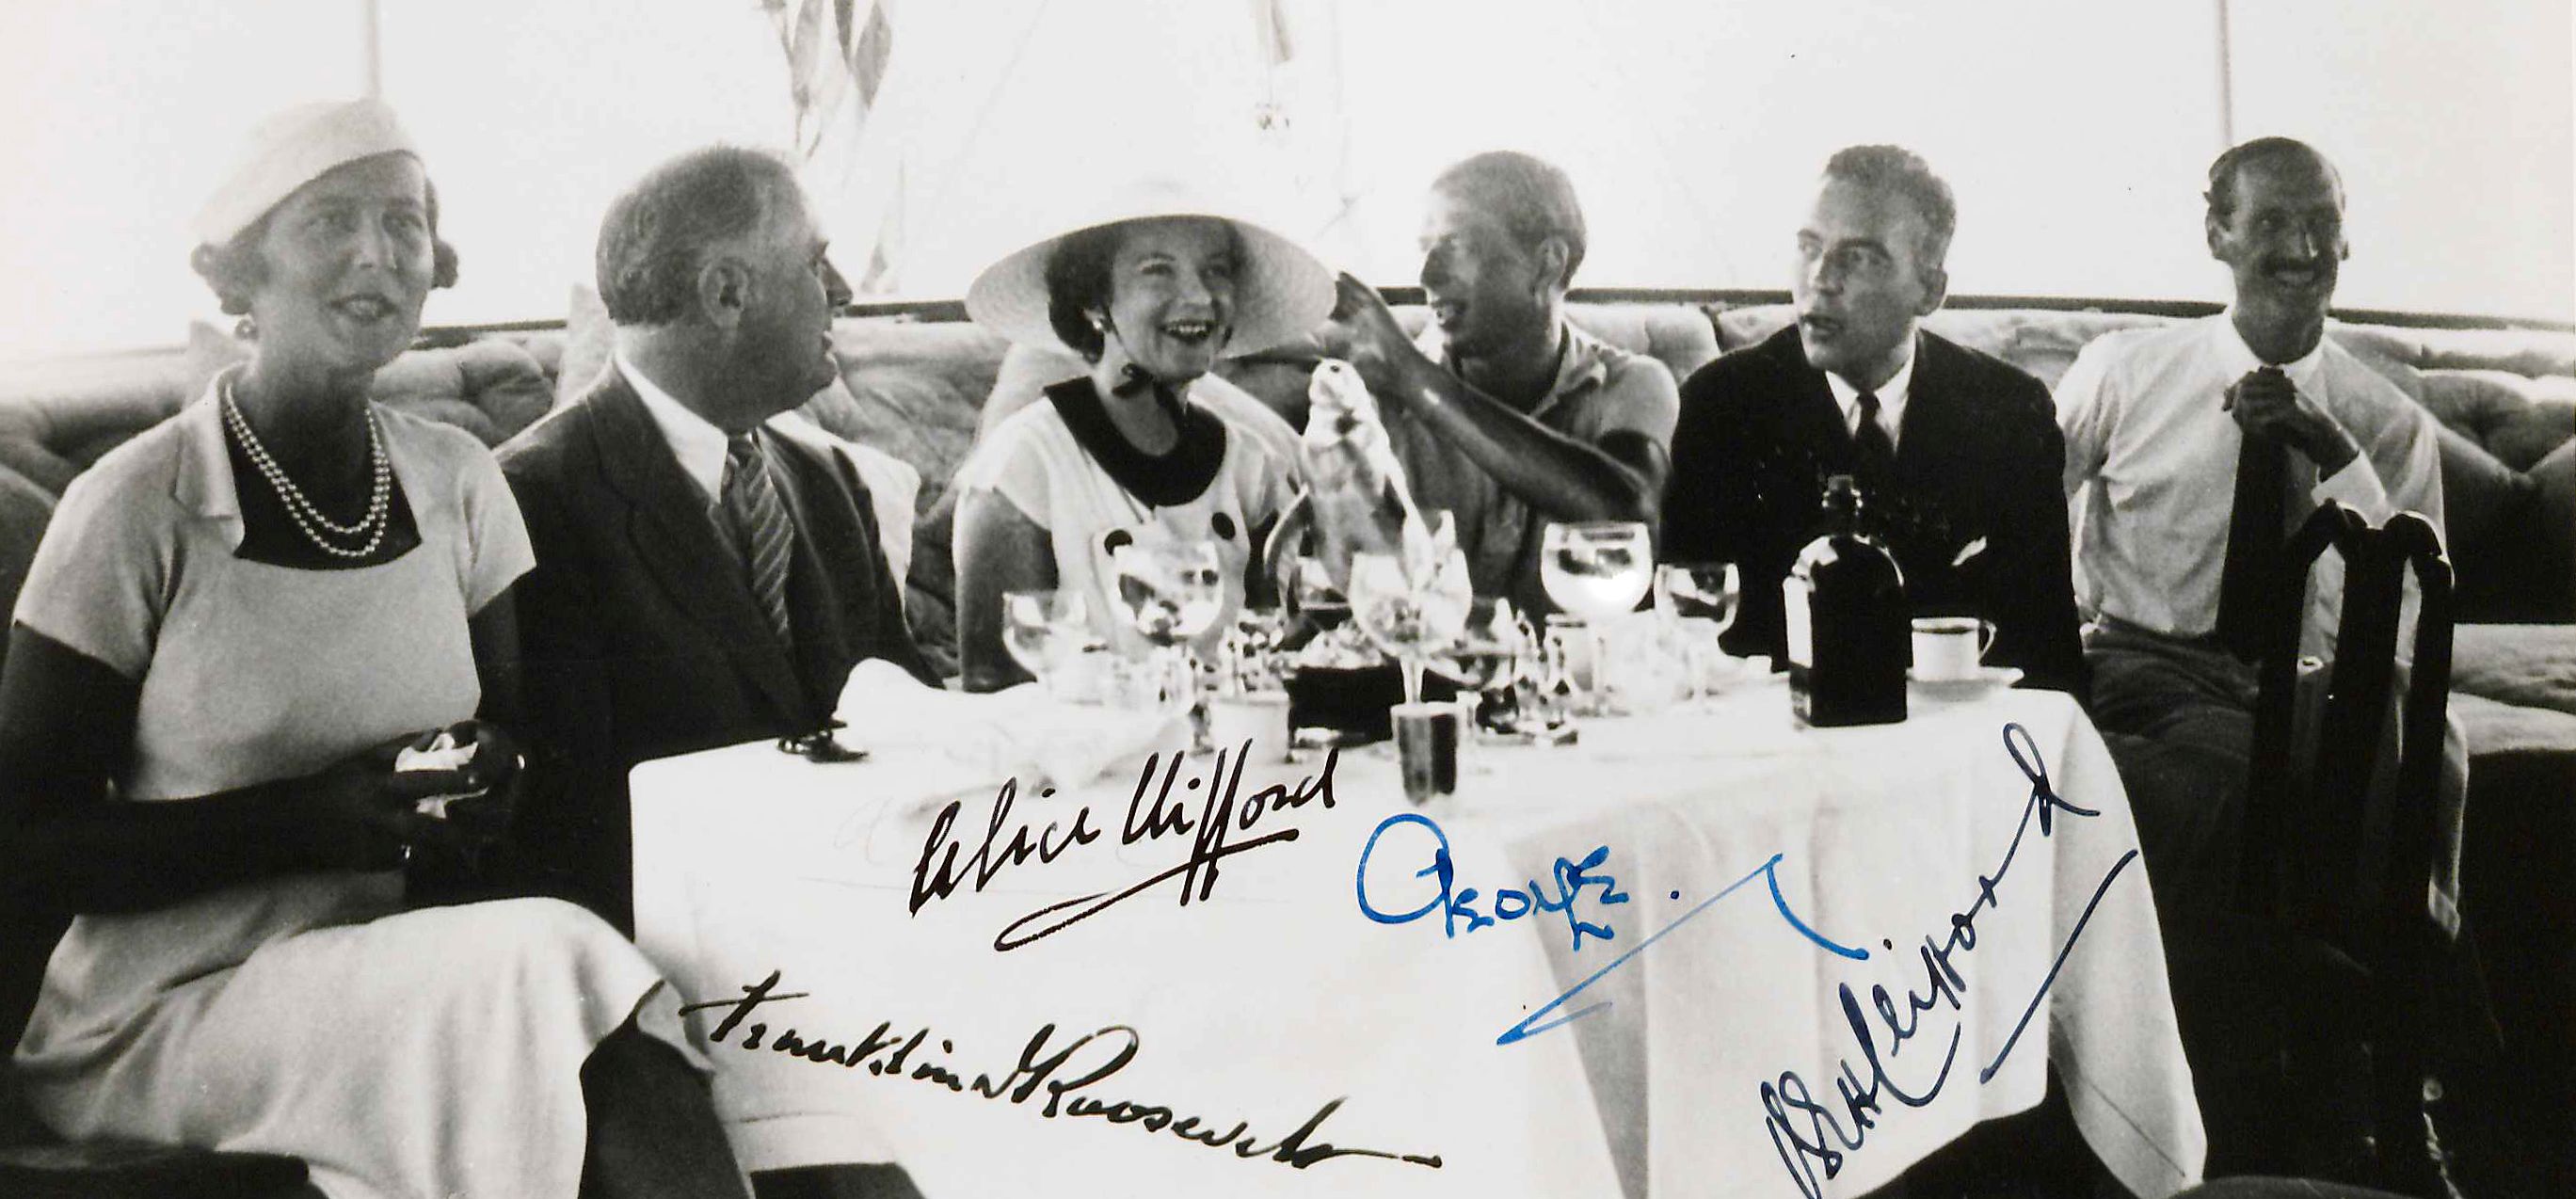 Astor, second from right, was friends with Franklin Roosevelt, who dispatched him to the Pacific in his yacht to gather intelligence.